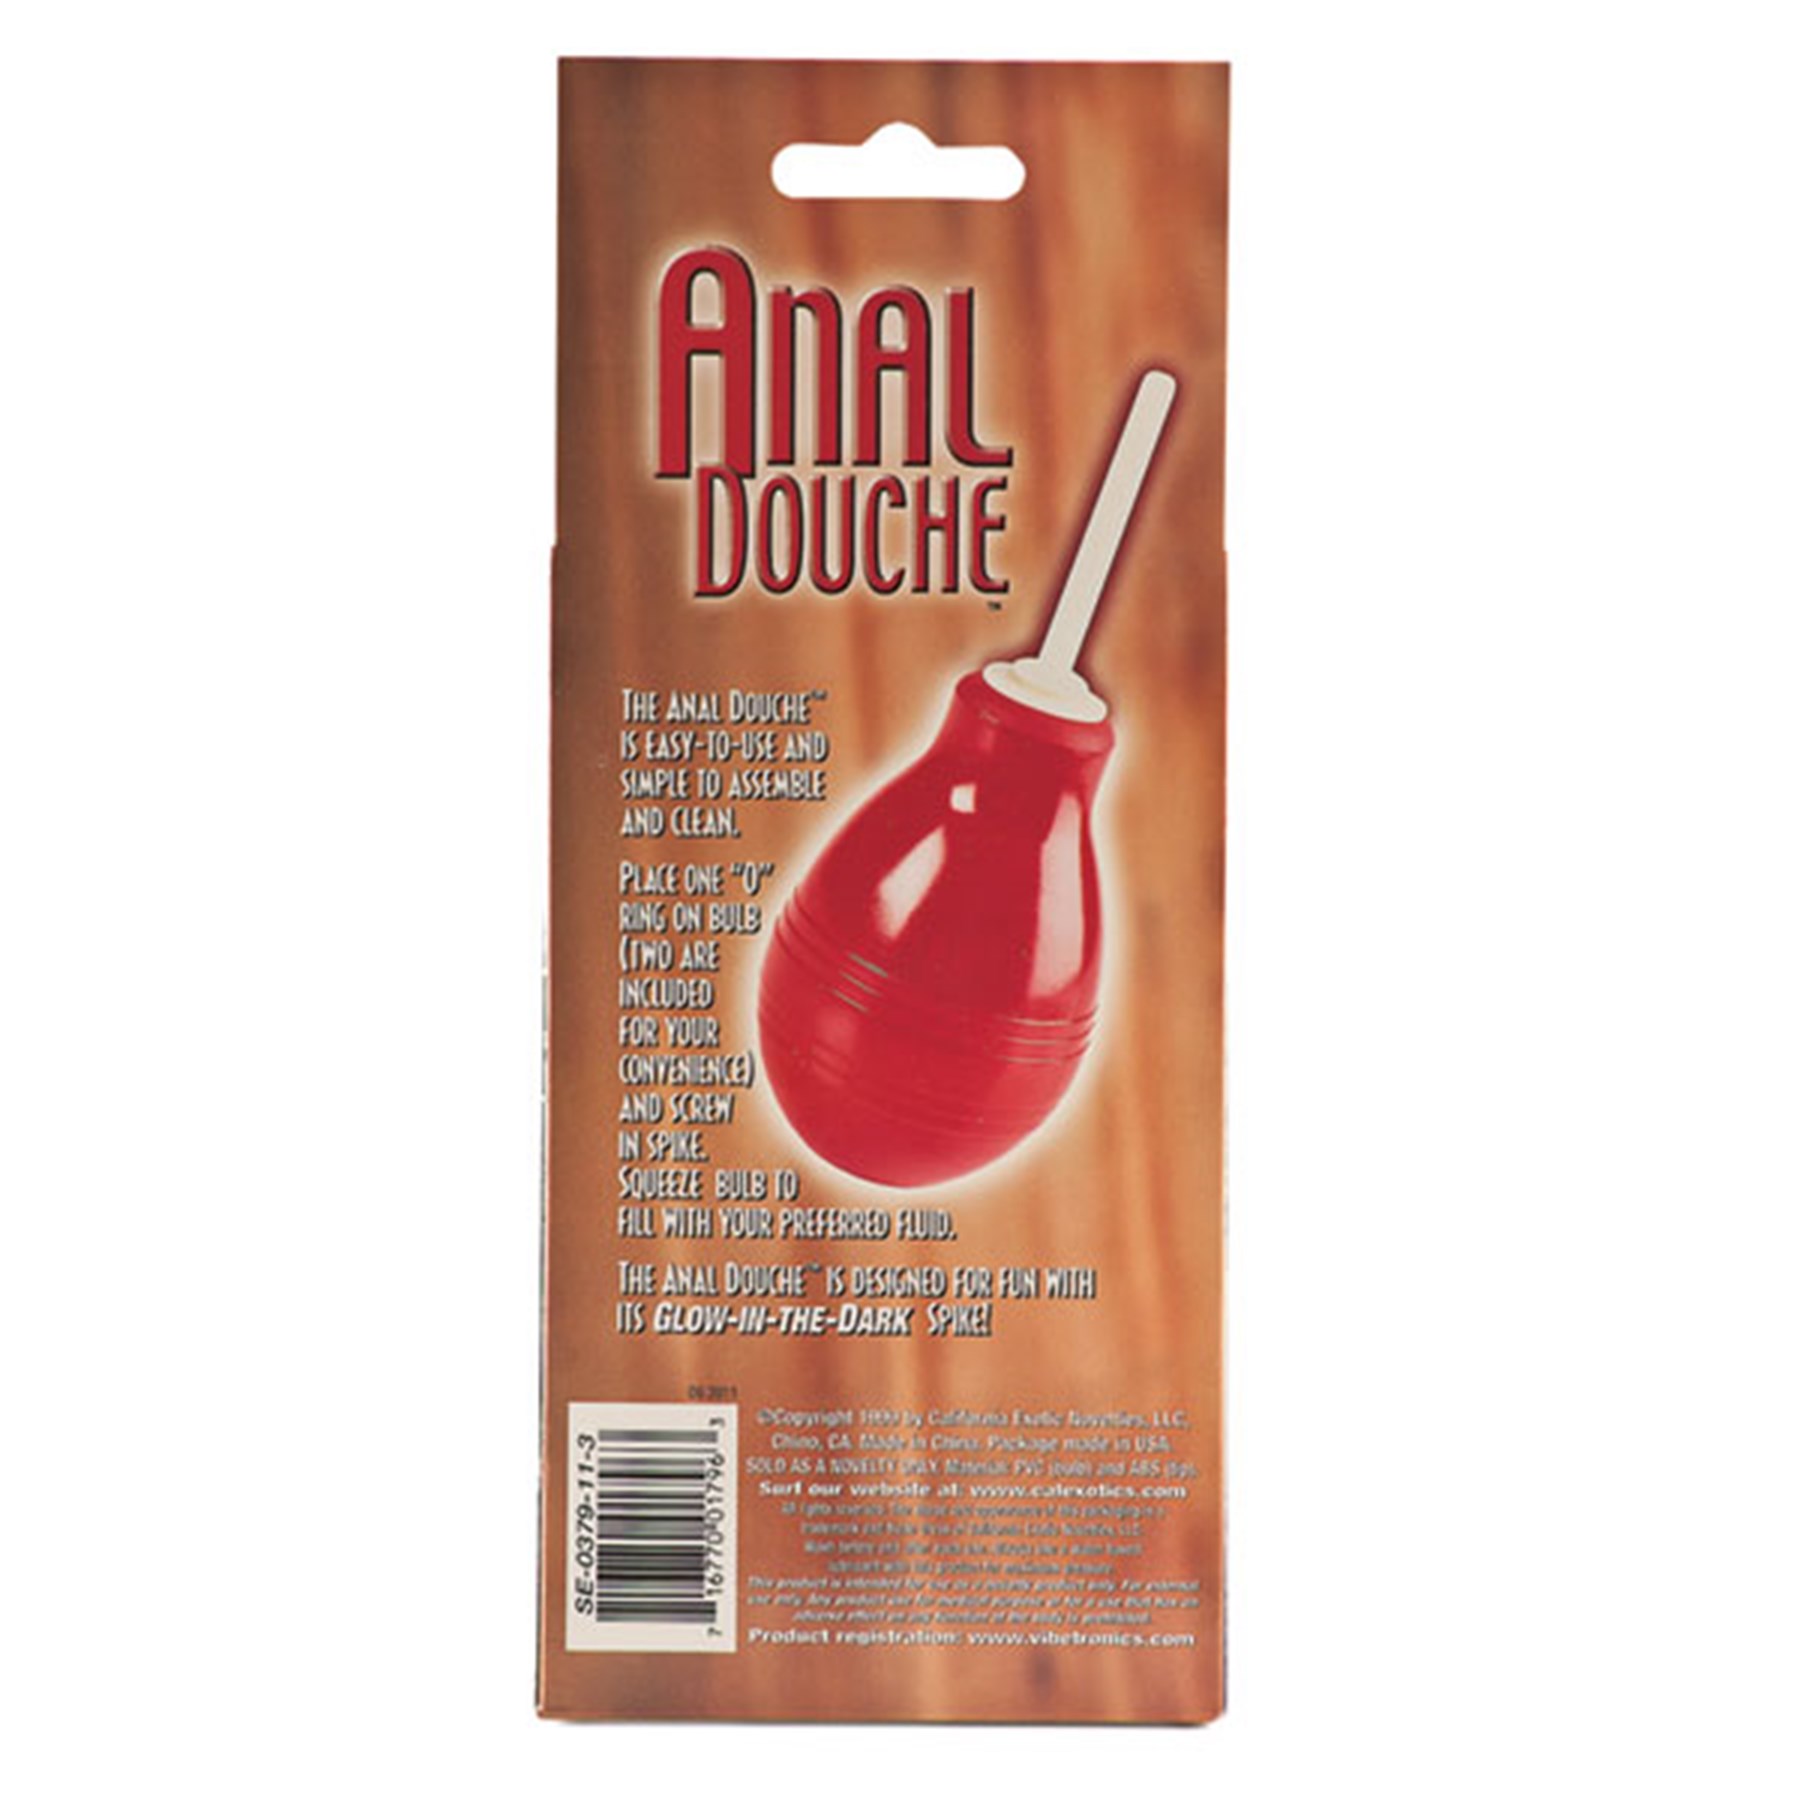 anal-douche packaging